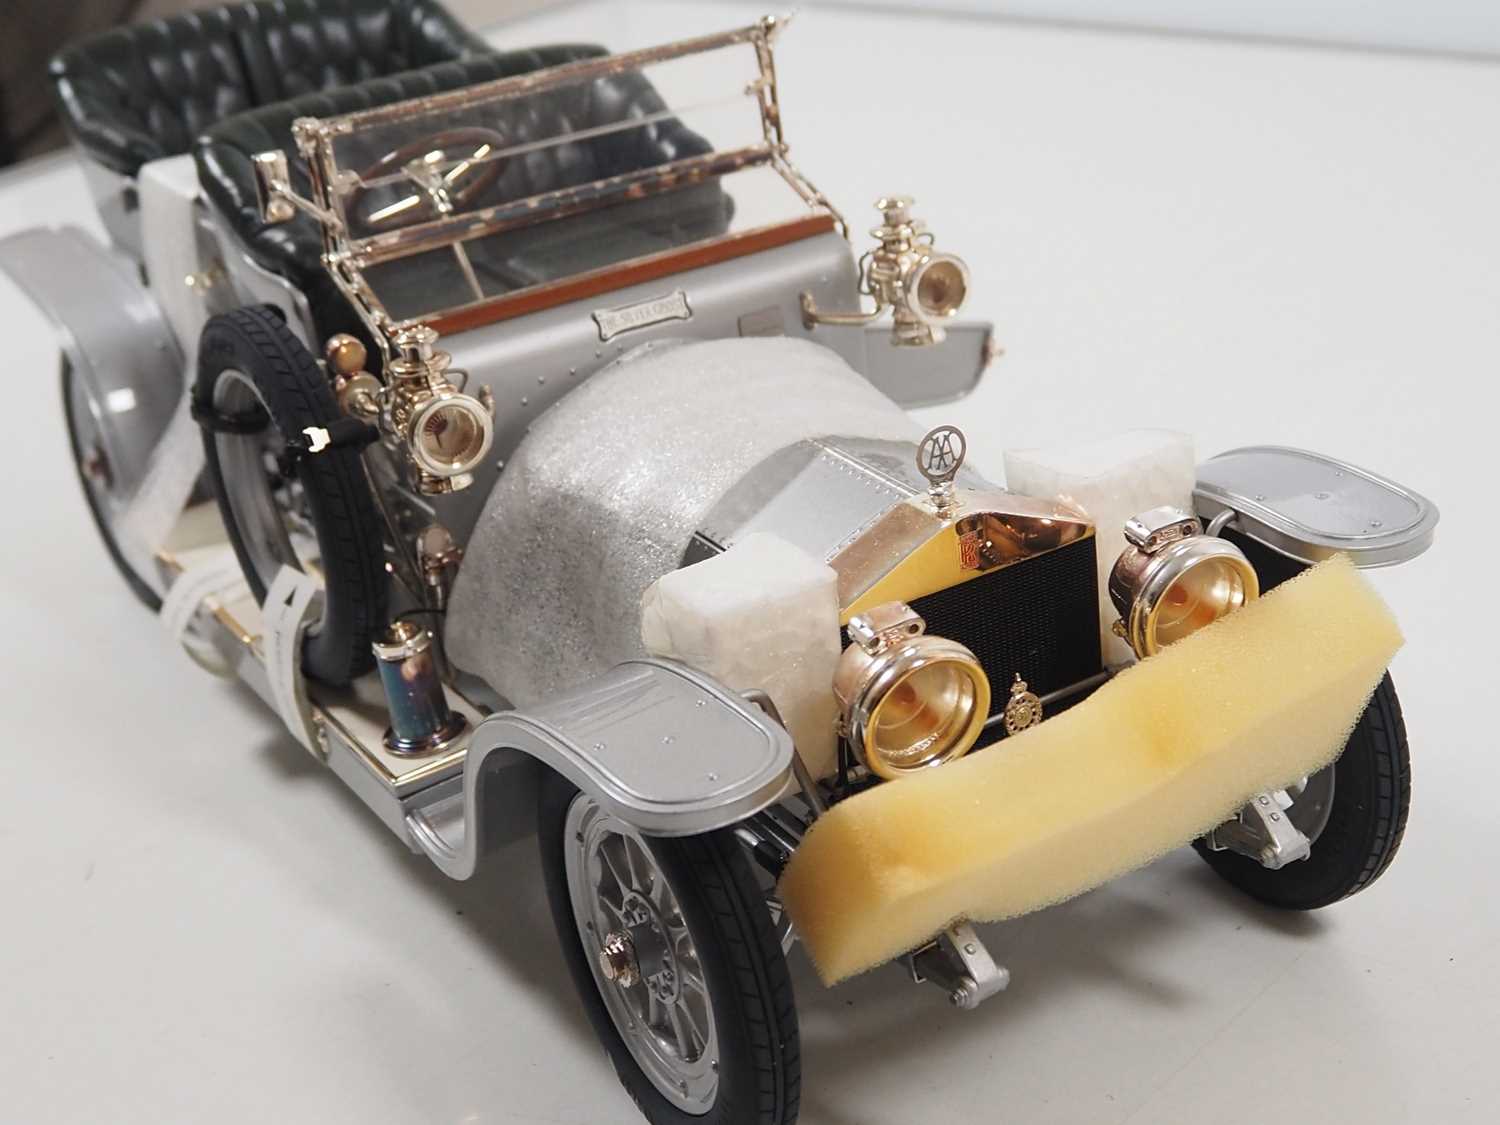 A FRANKLIN MINT 1:12 scale diecast 1907 Rolls Royce Silver Ghost - appears undisplayed in original - Image 4 of 8